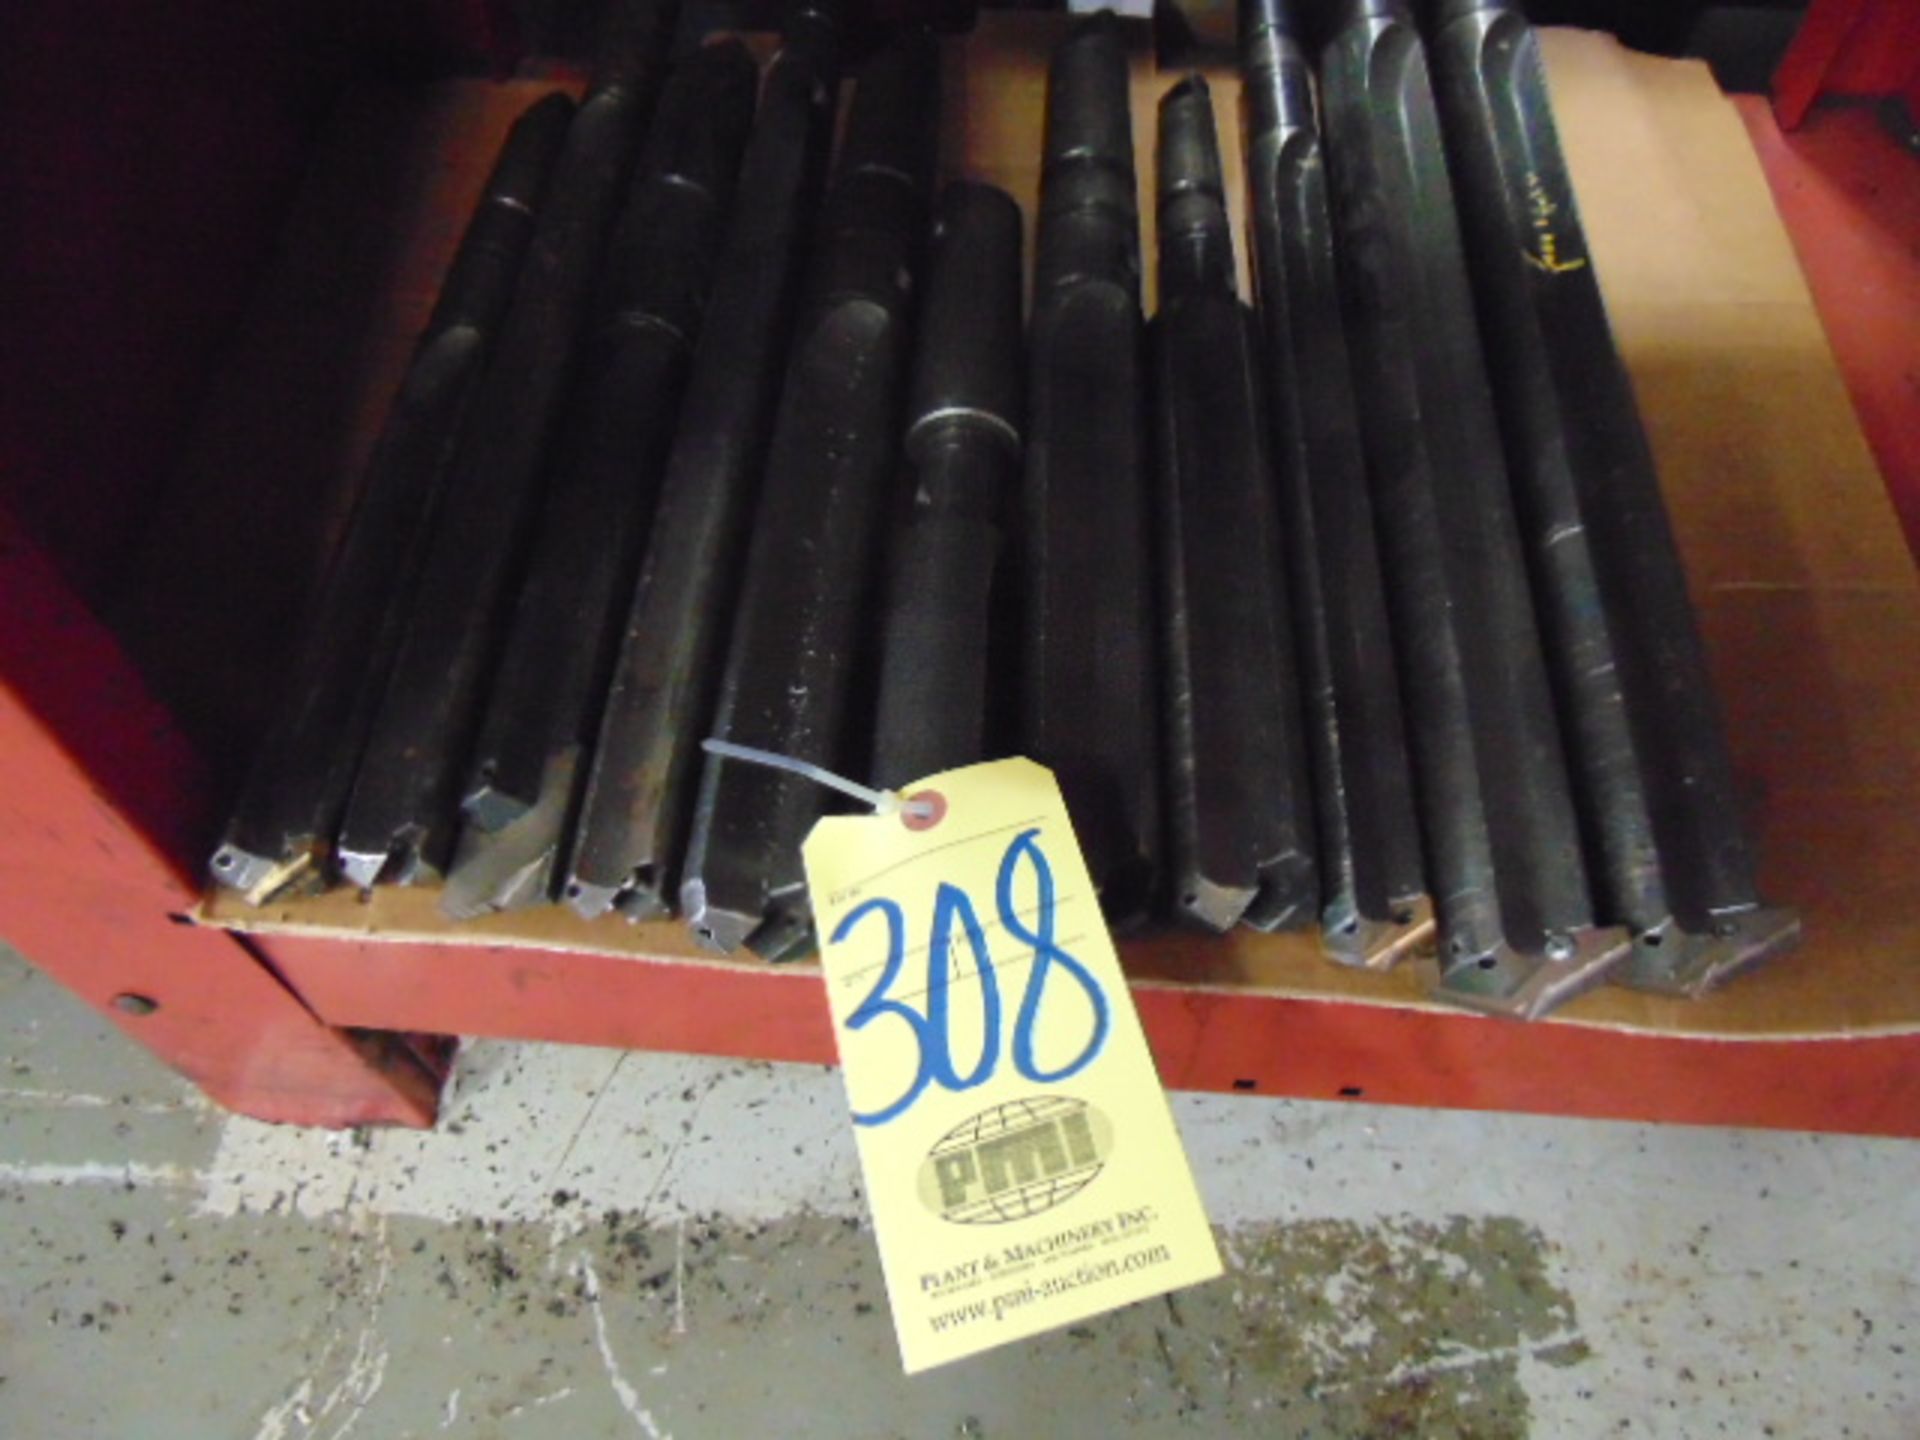 LOT OF SPADE DRILLS (11), assorted